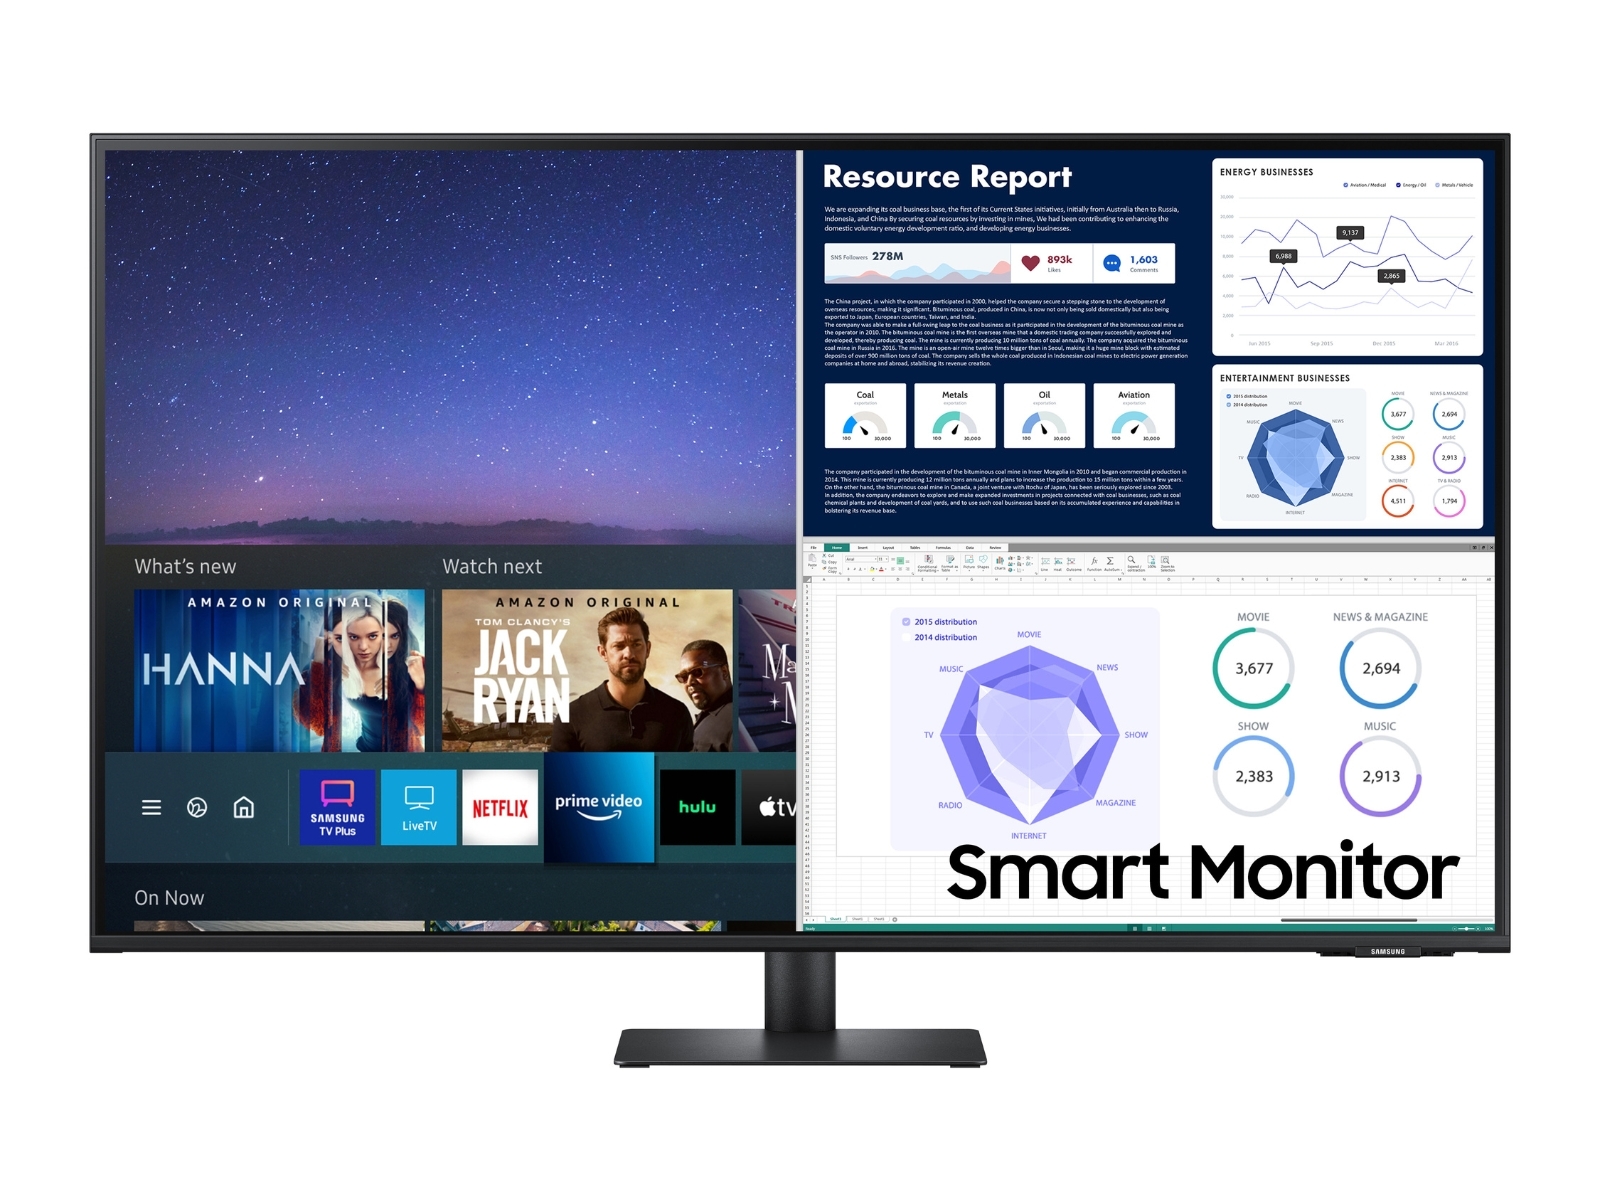 Samsung Smart Monitor M7 Review: The Perfect Display for Work and Play